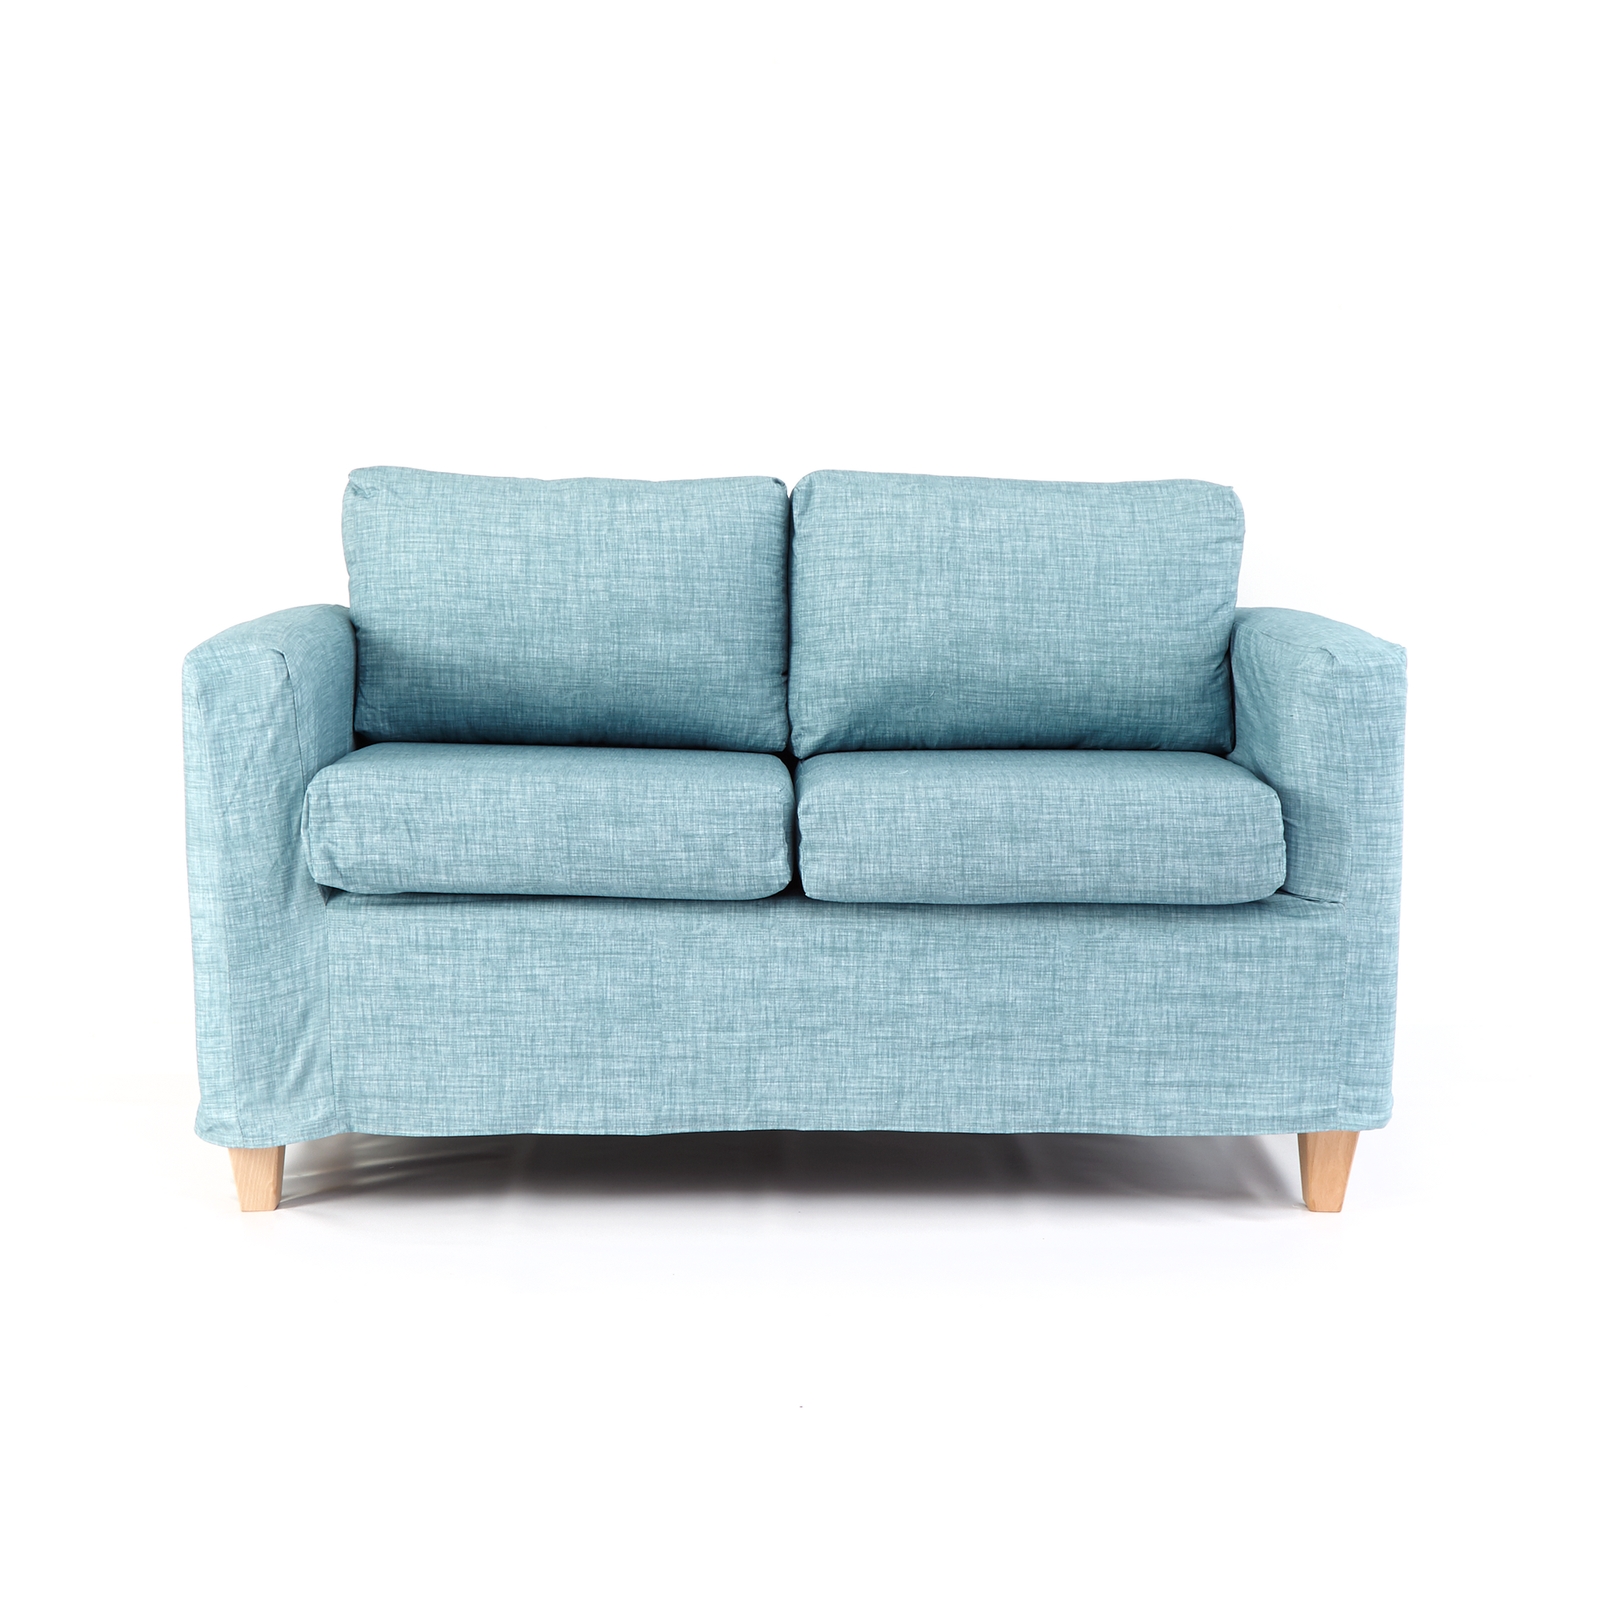 Sofa With Removable Cover Soft Blue - 155 x 82 x 82cm - Each